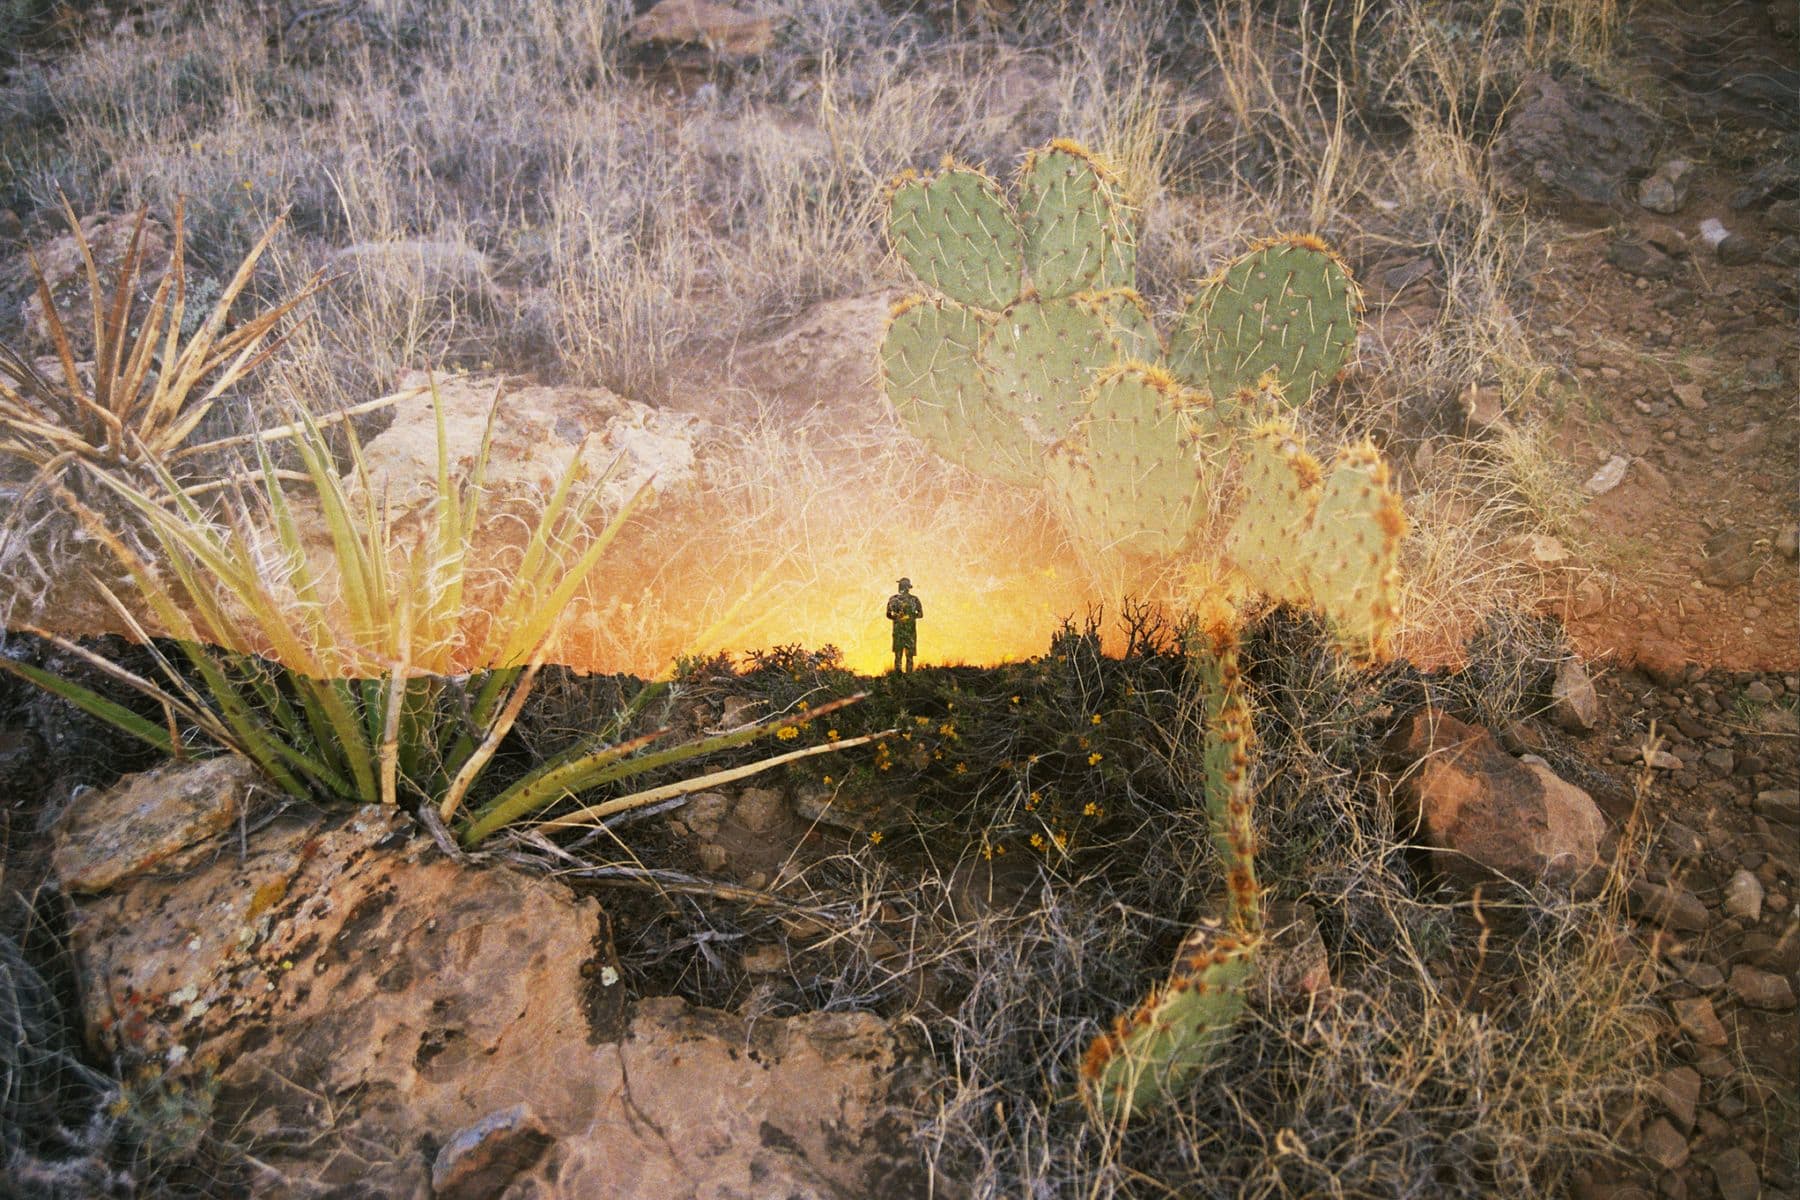 A man standing on a hill at sunset, with a multi-exposed desert landscape imposed over him, including cacti, dried grass, and rocky terrain.